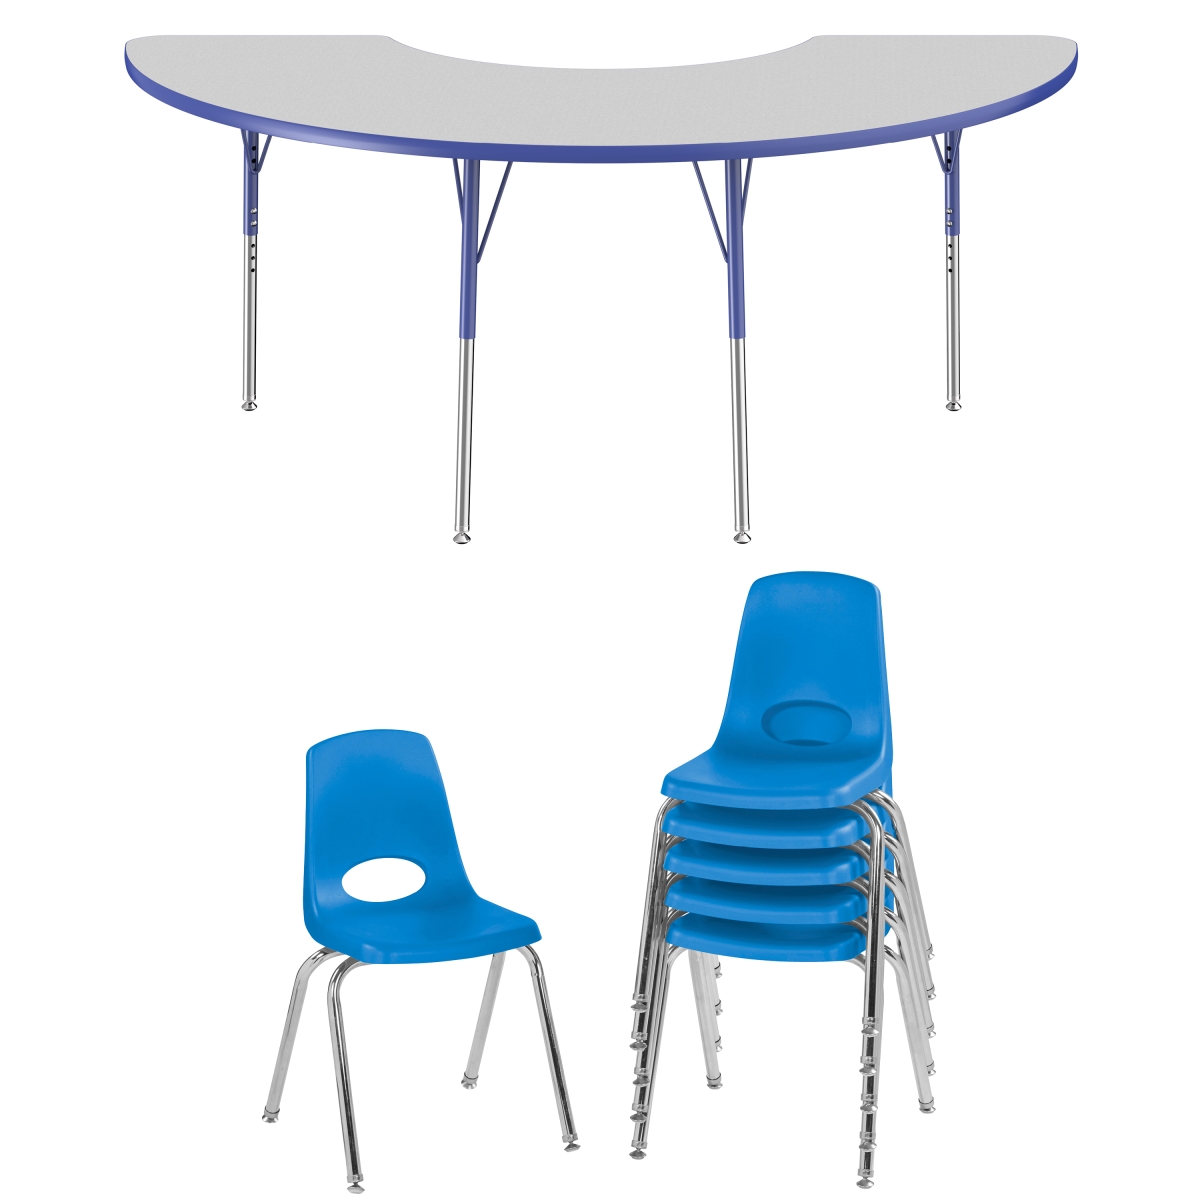 10275-gybl 36 X 72 In. Half Moon T-mold Adjustable Activity Table Standard Swivel With 6 Stack Chairs 16 In. Swivel Glide - Grey & Blue